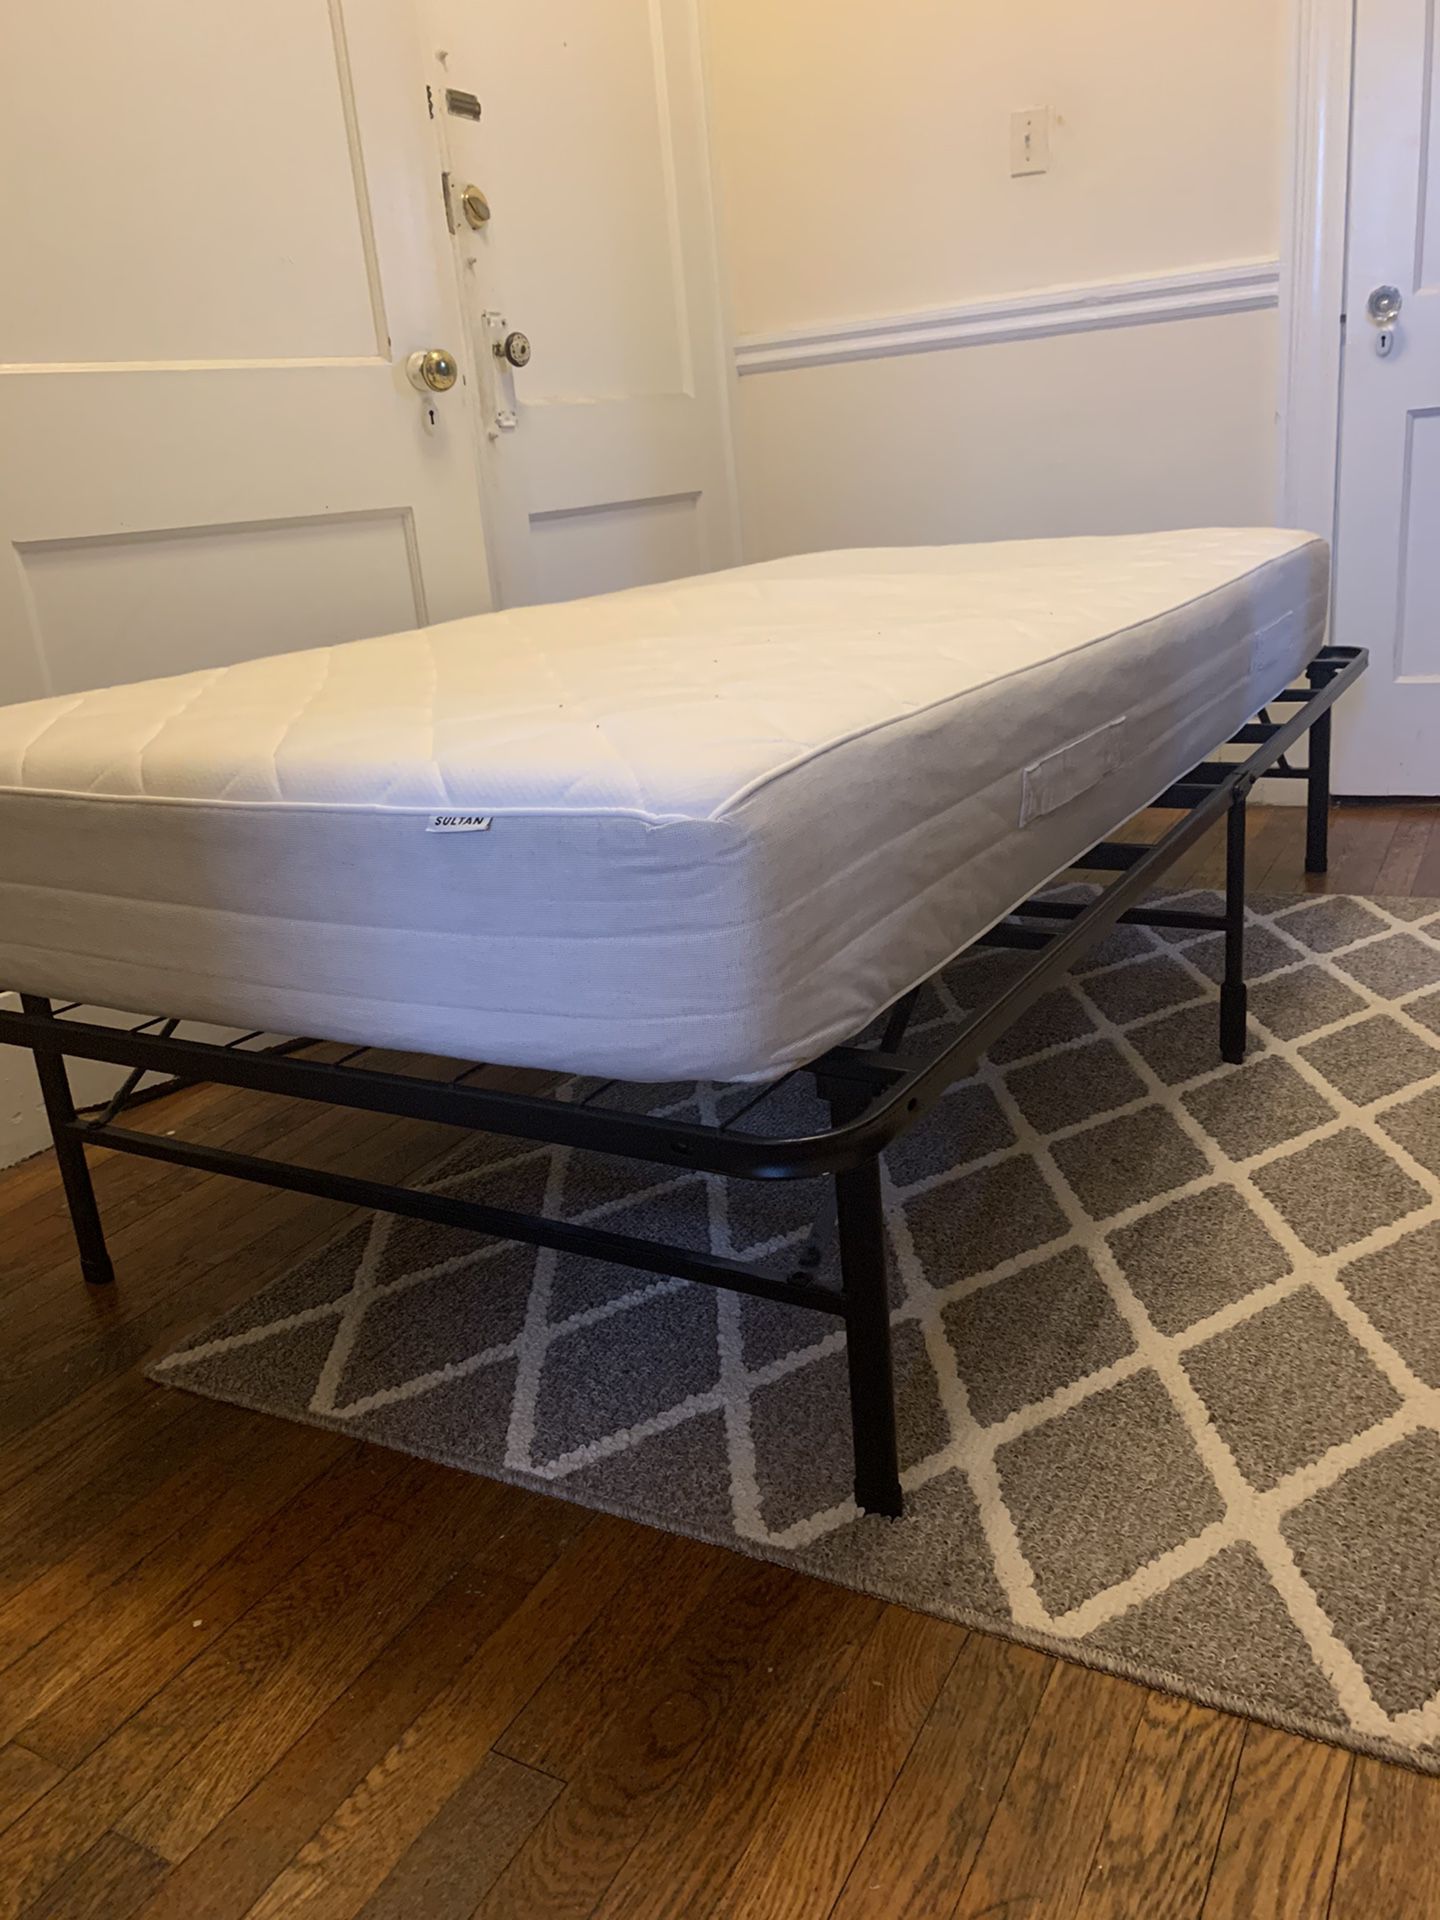 TWIN XL MATTRESS AND BED FRAME